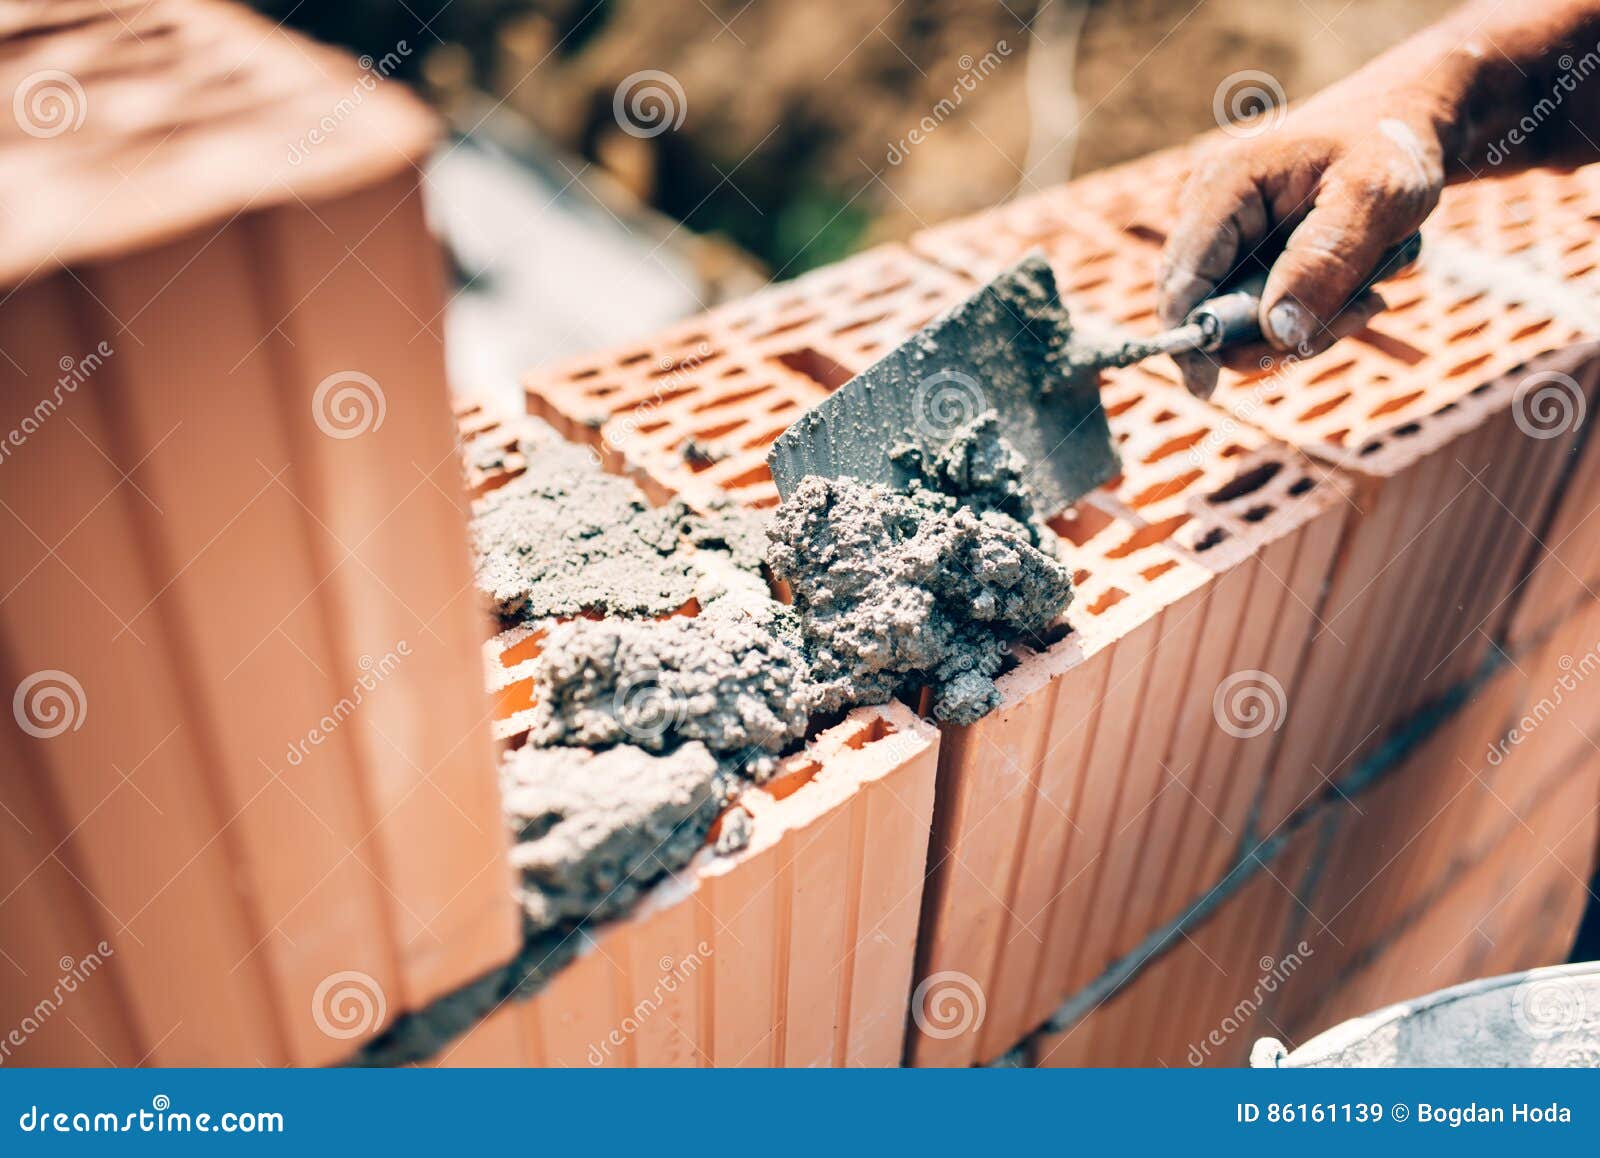 worker using trowel and tools for building exterior walls with bricks and mortar